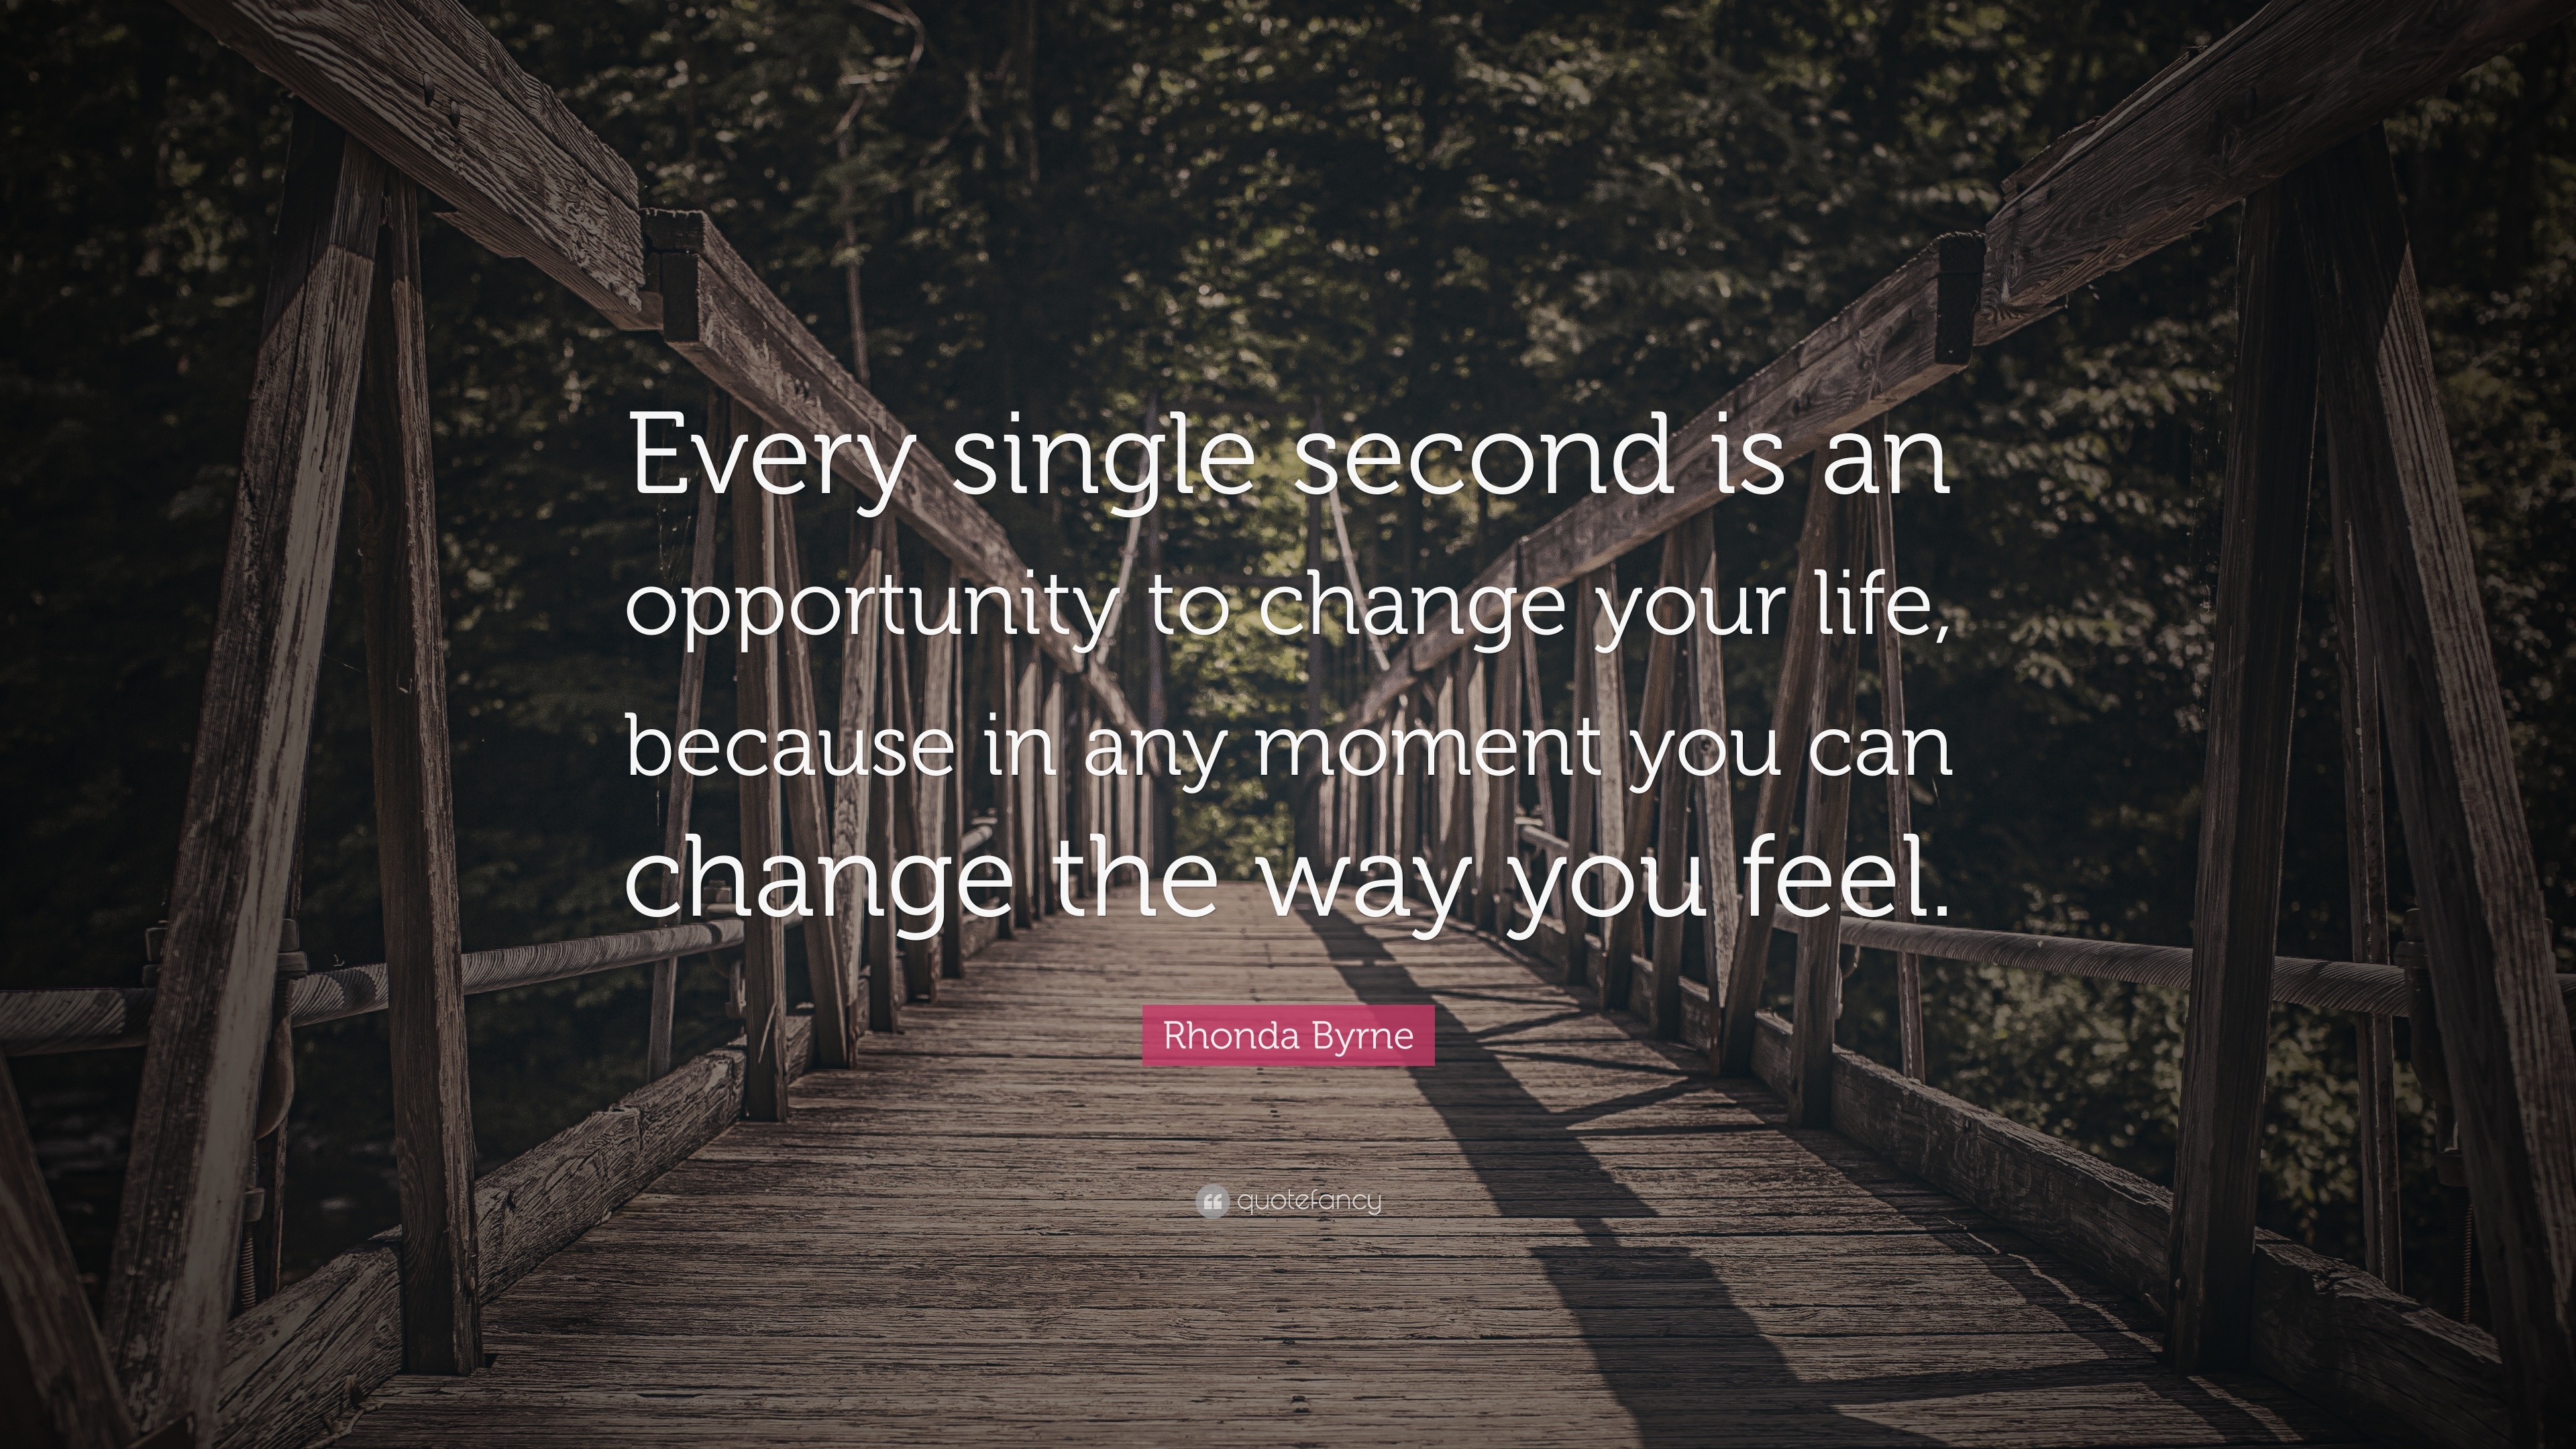 Rhonda Byrne Quote Every Single Second Is An Opportunity To Change Your Life Because In Any